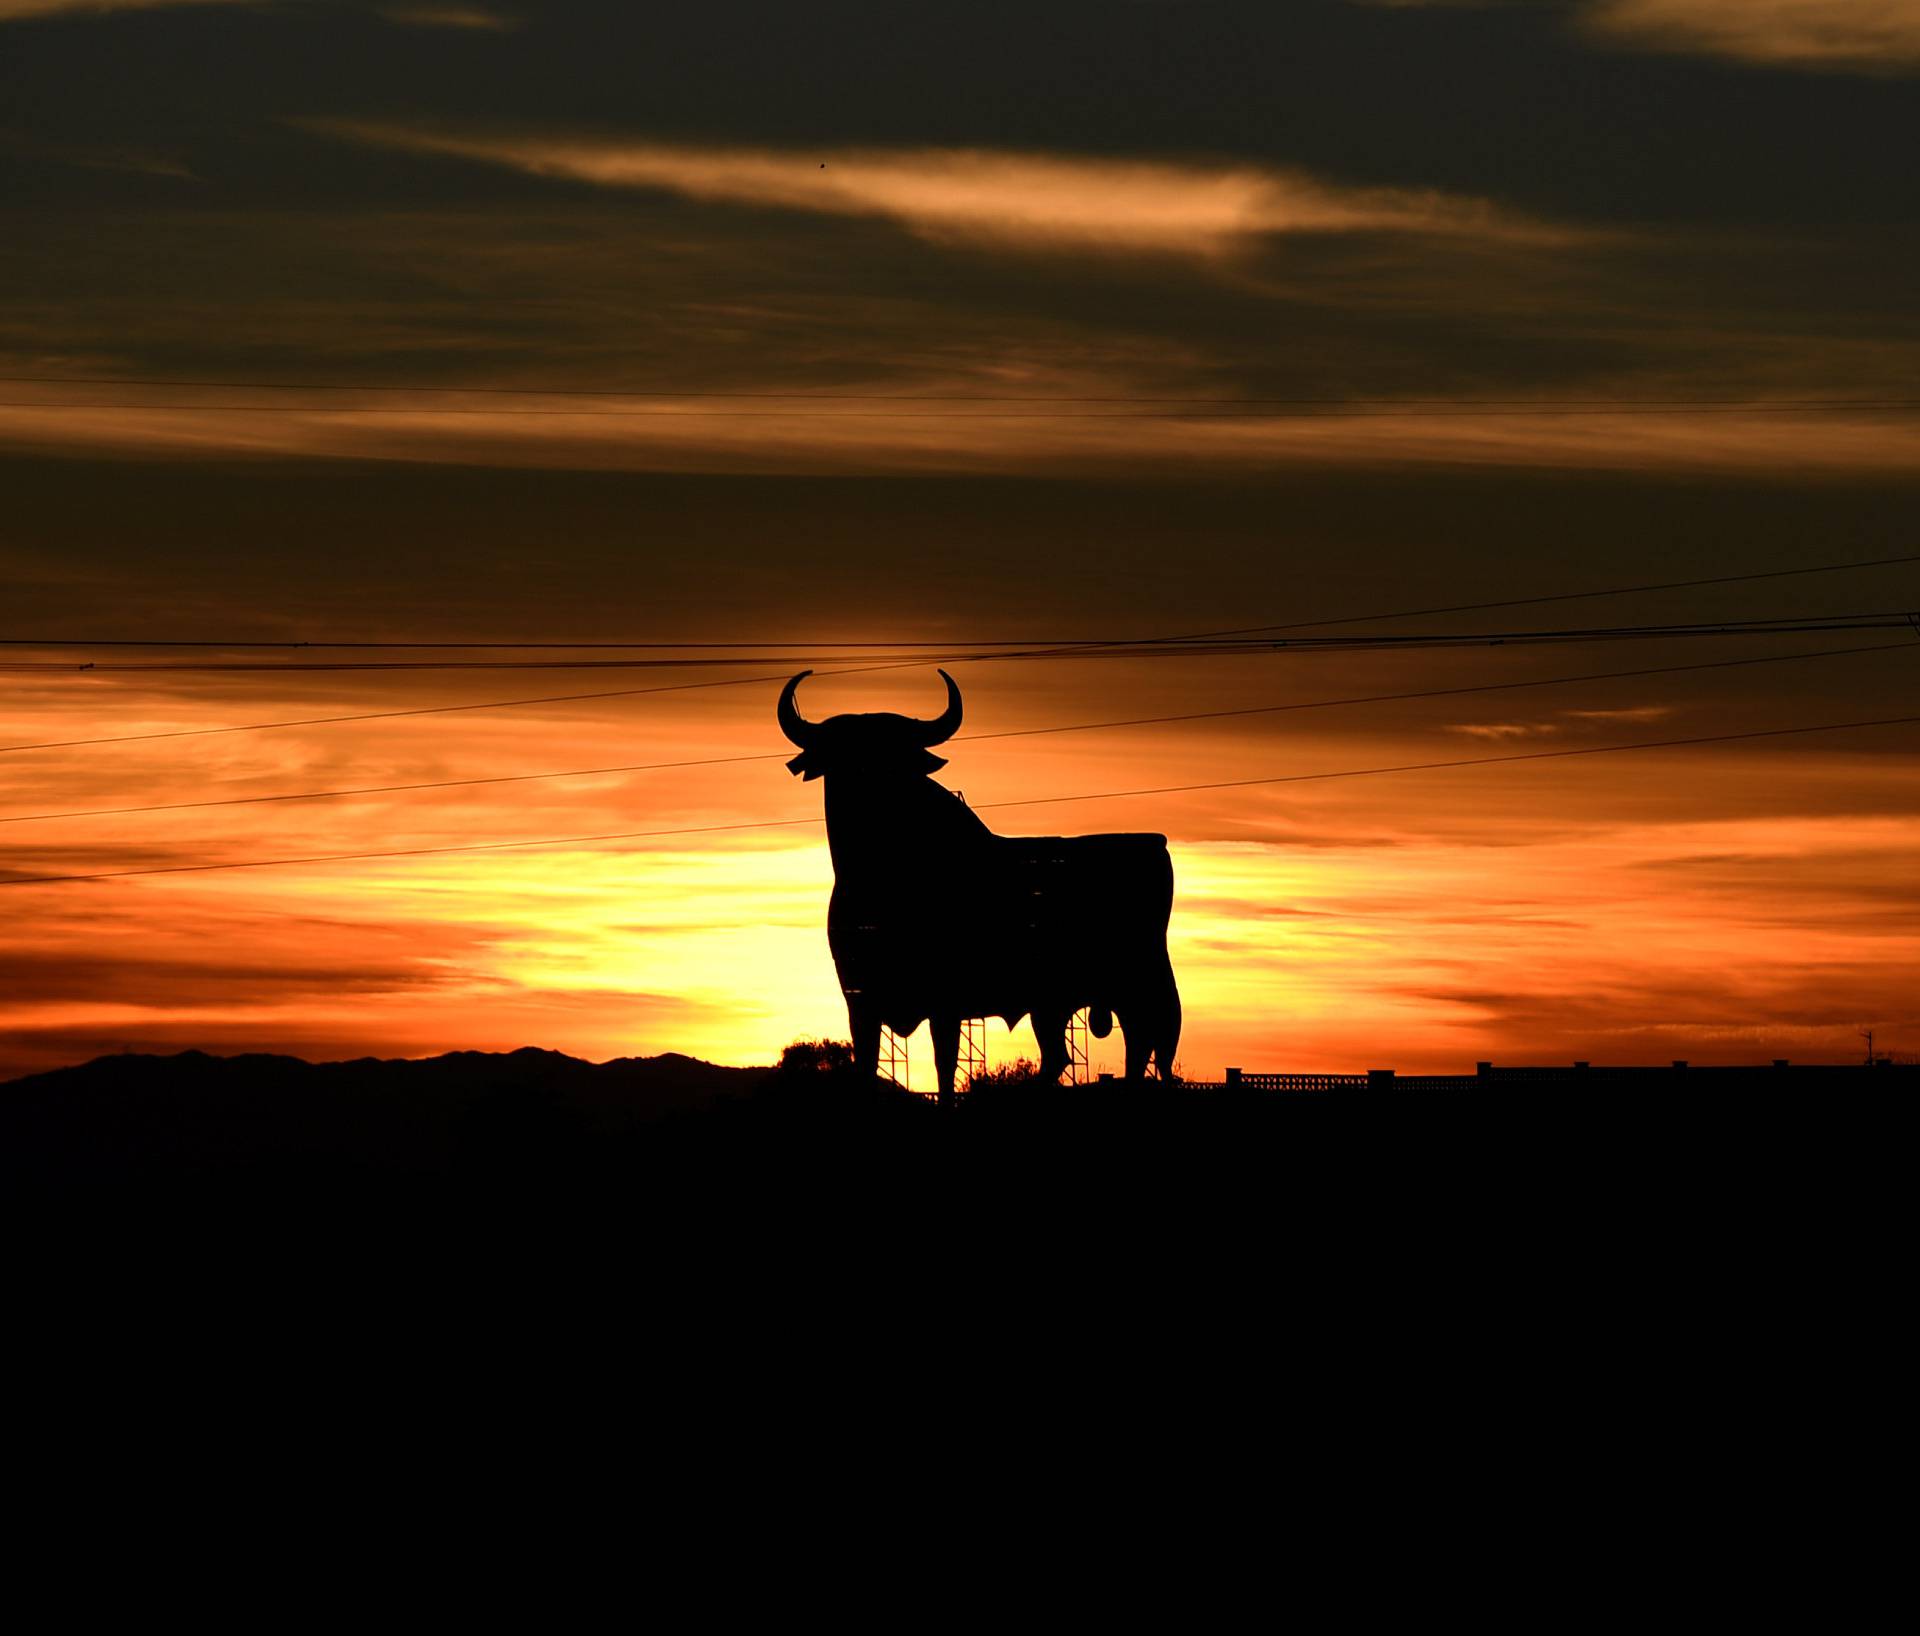 Power lines connecting pylons of high-tension electricity and a billboard-sized figure of a bull, known as the "Osborne bull", are seen at sunset in El Berron